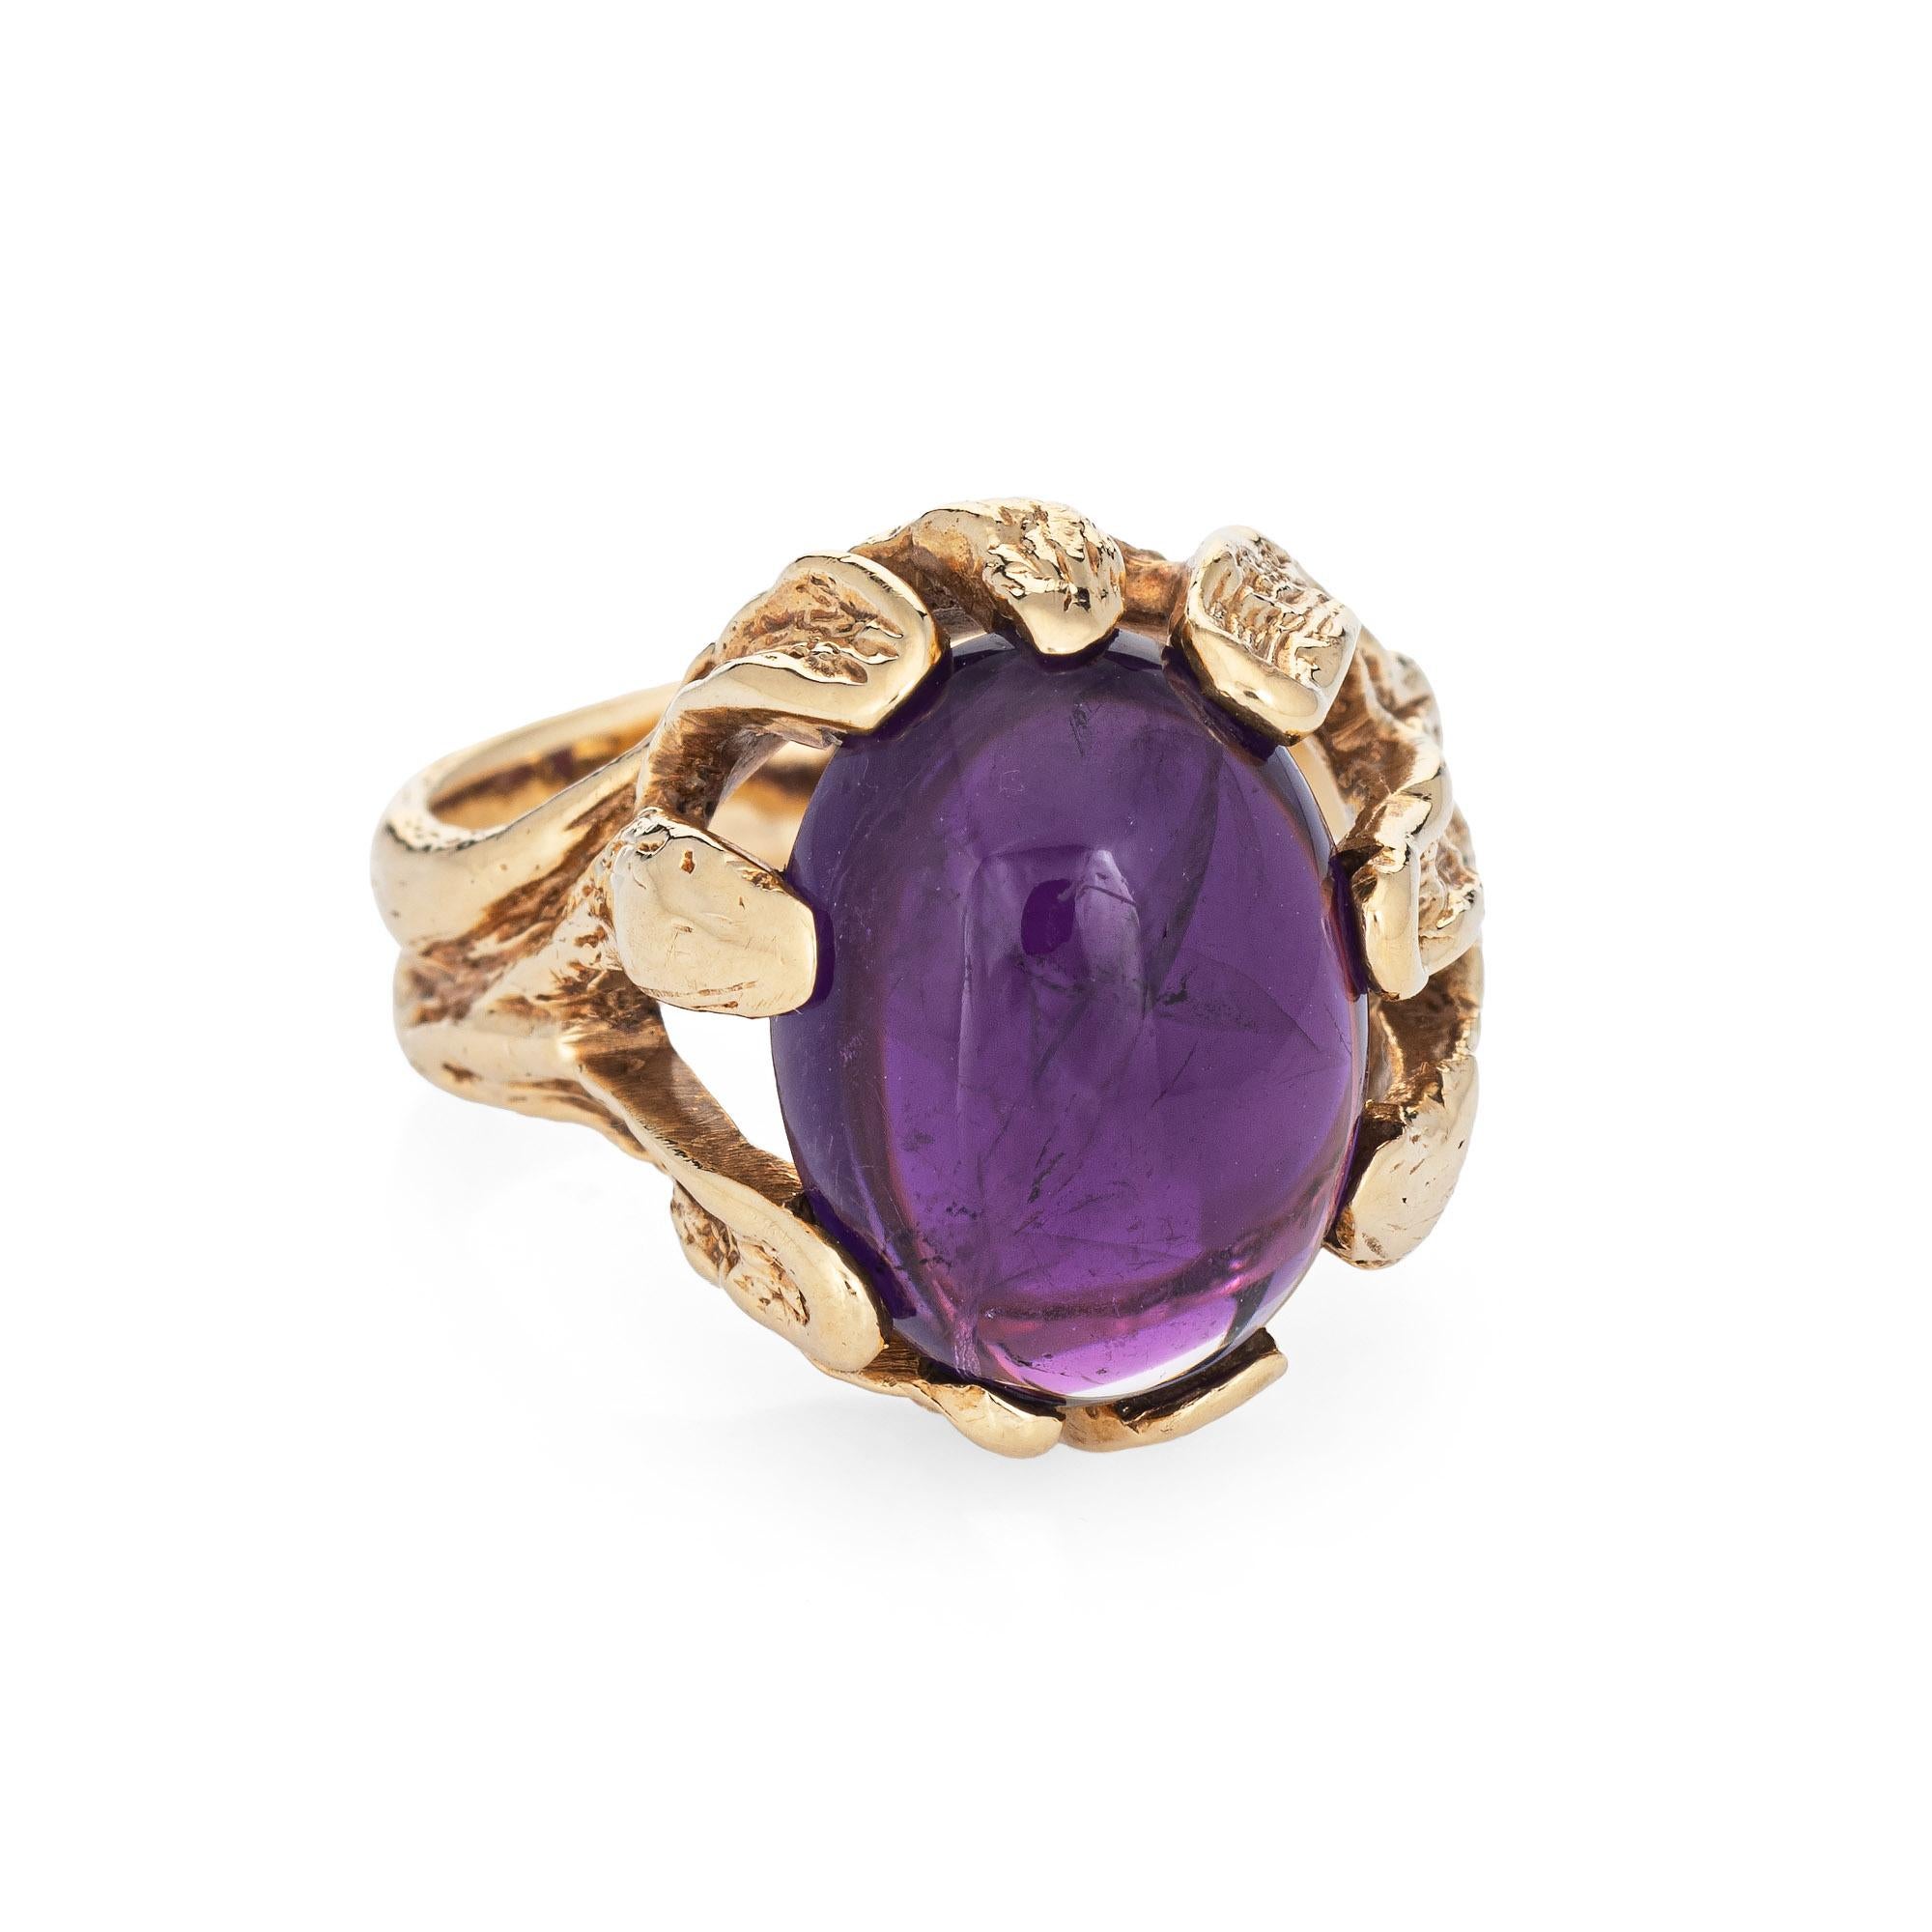 Stylish vintage amethyst cocktail ring (circa 1970s) crafted in 14 karat yellow gold. 

Cabochon cut amethyst measures 17mm x 12.5mm (estimated at 10 carats). The amethyst is in very good condition and free of cracks or chips. Twelve lapis beads